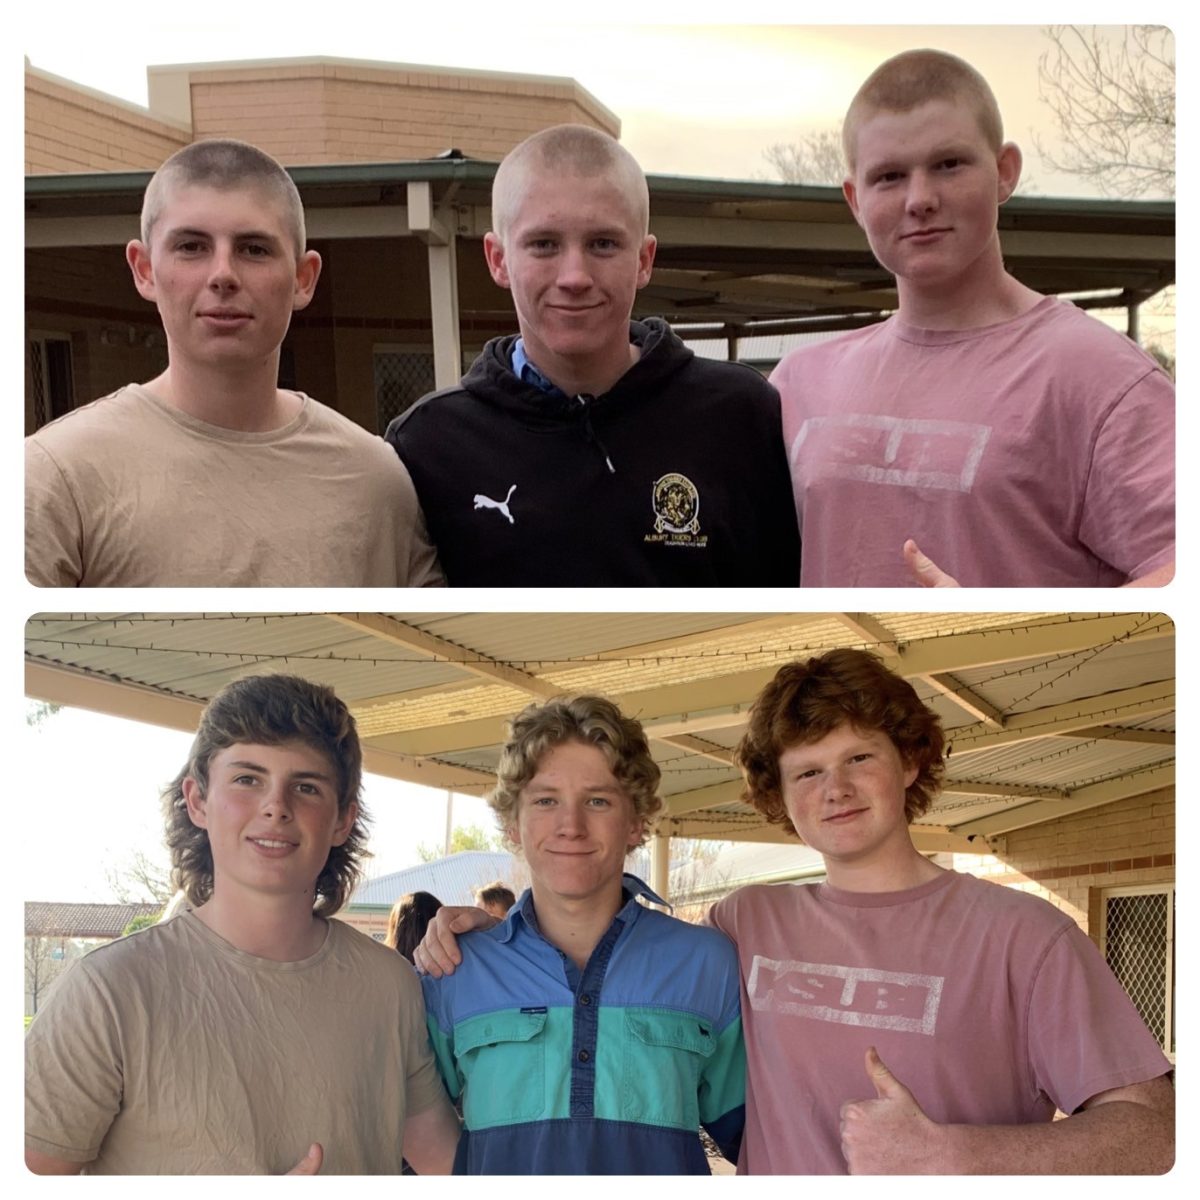 Three boys before and after shaving their heads